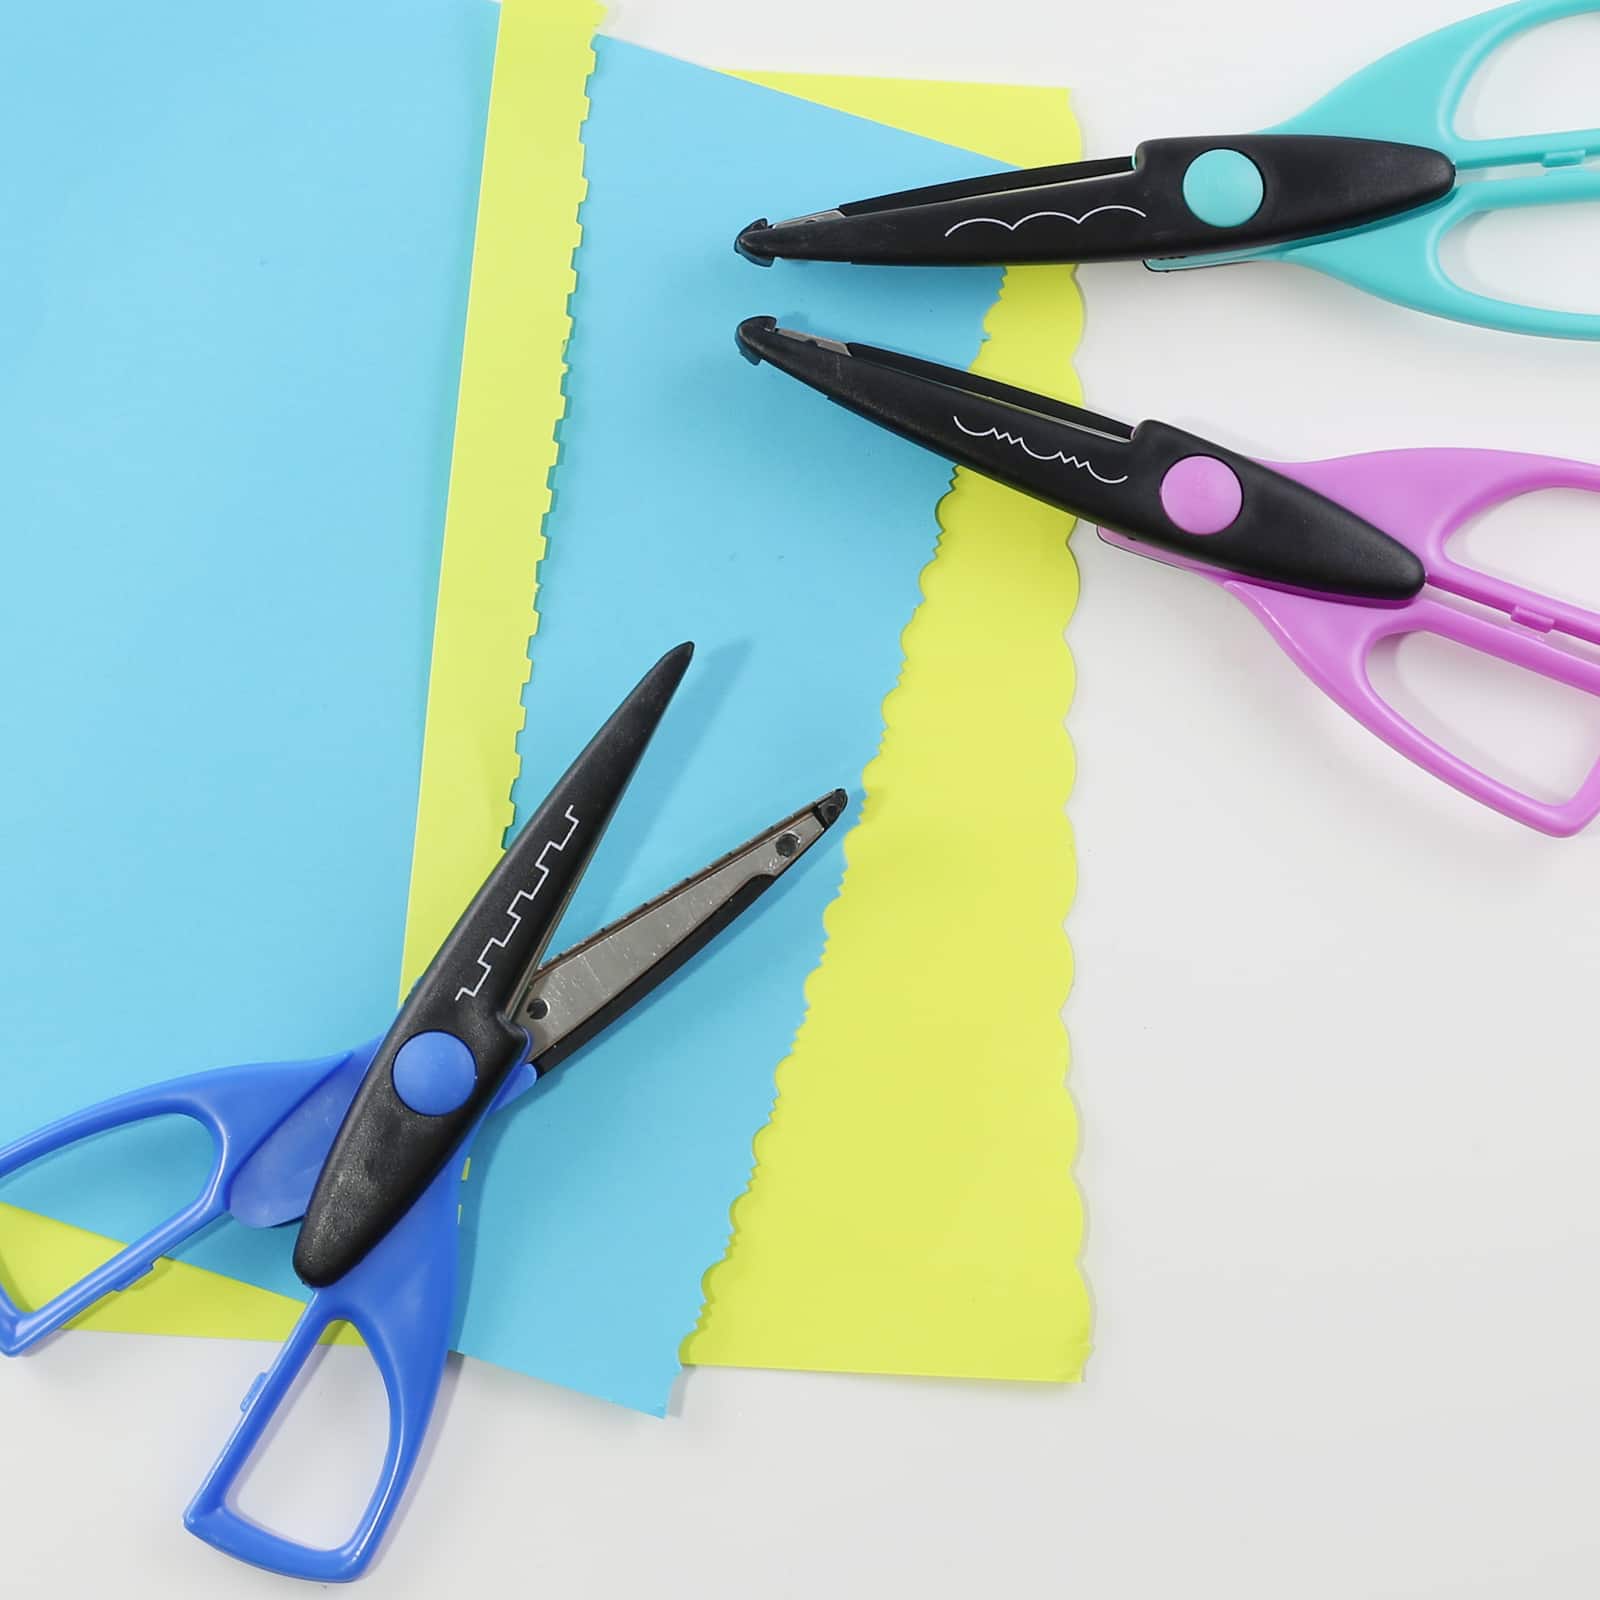 12 Packs: 12 ct. (144 total) Decorative Scissors by Craft Smart™